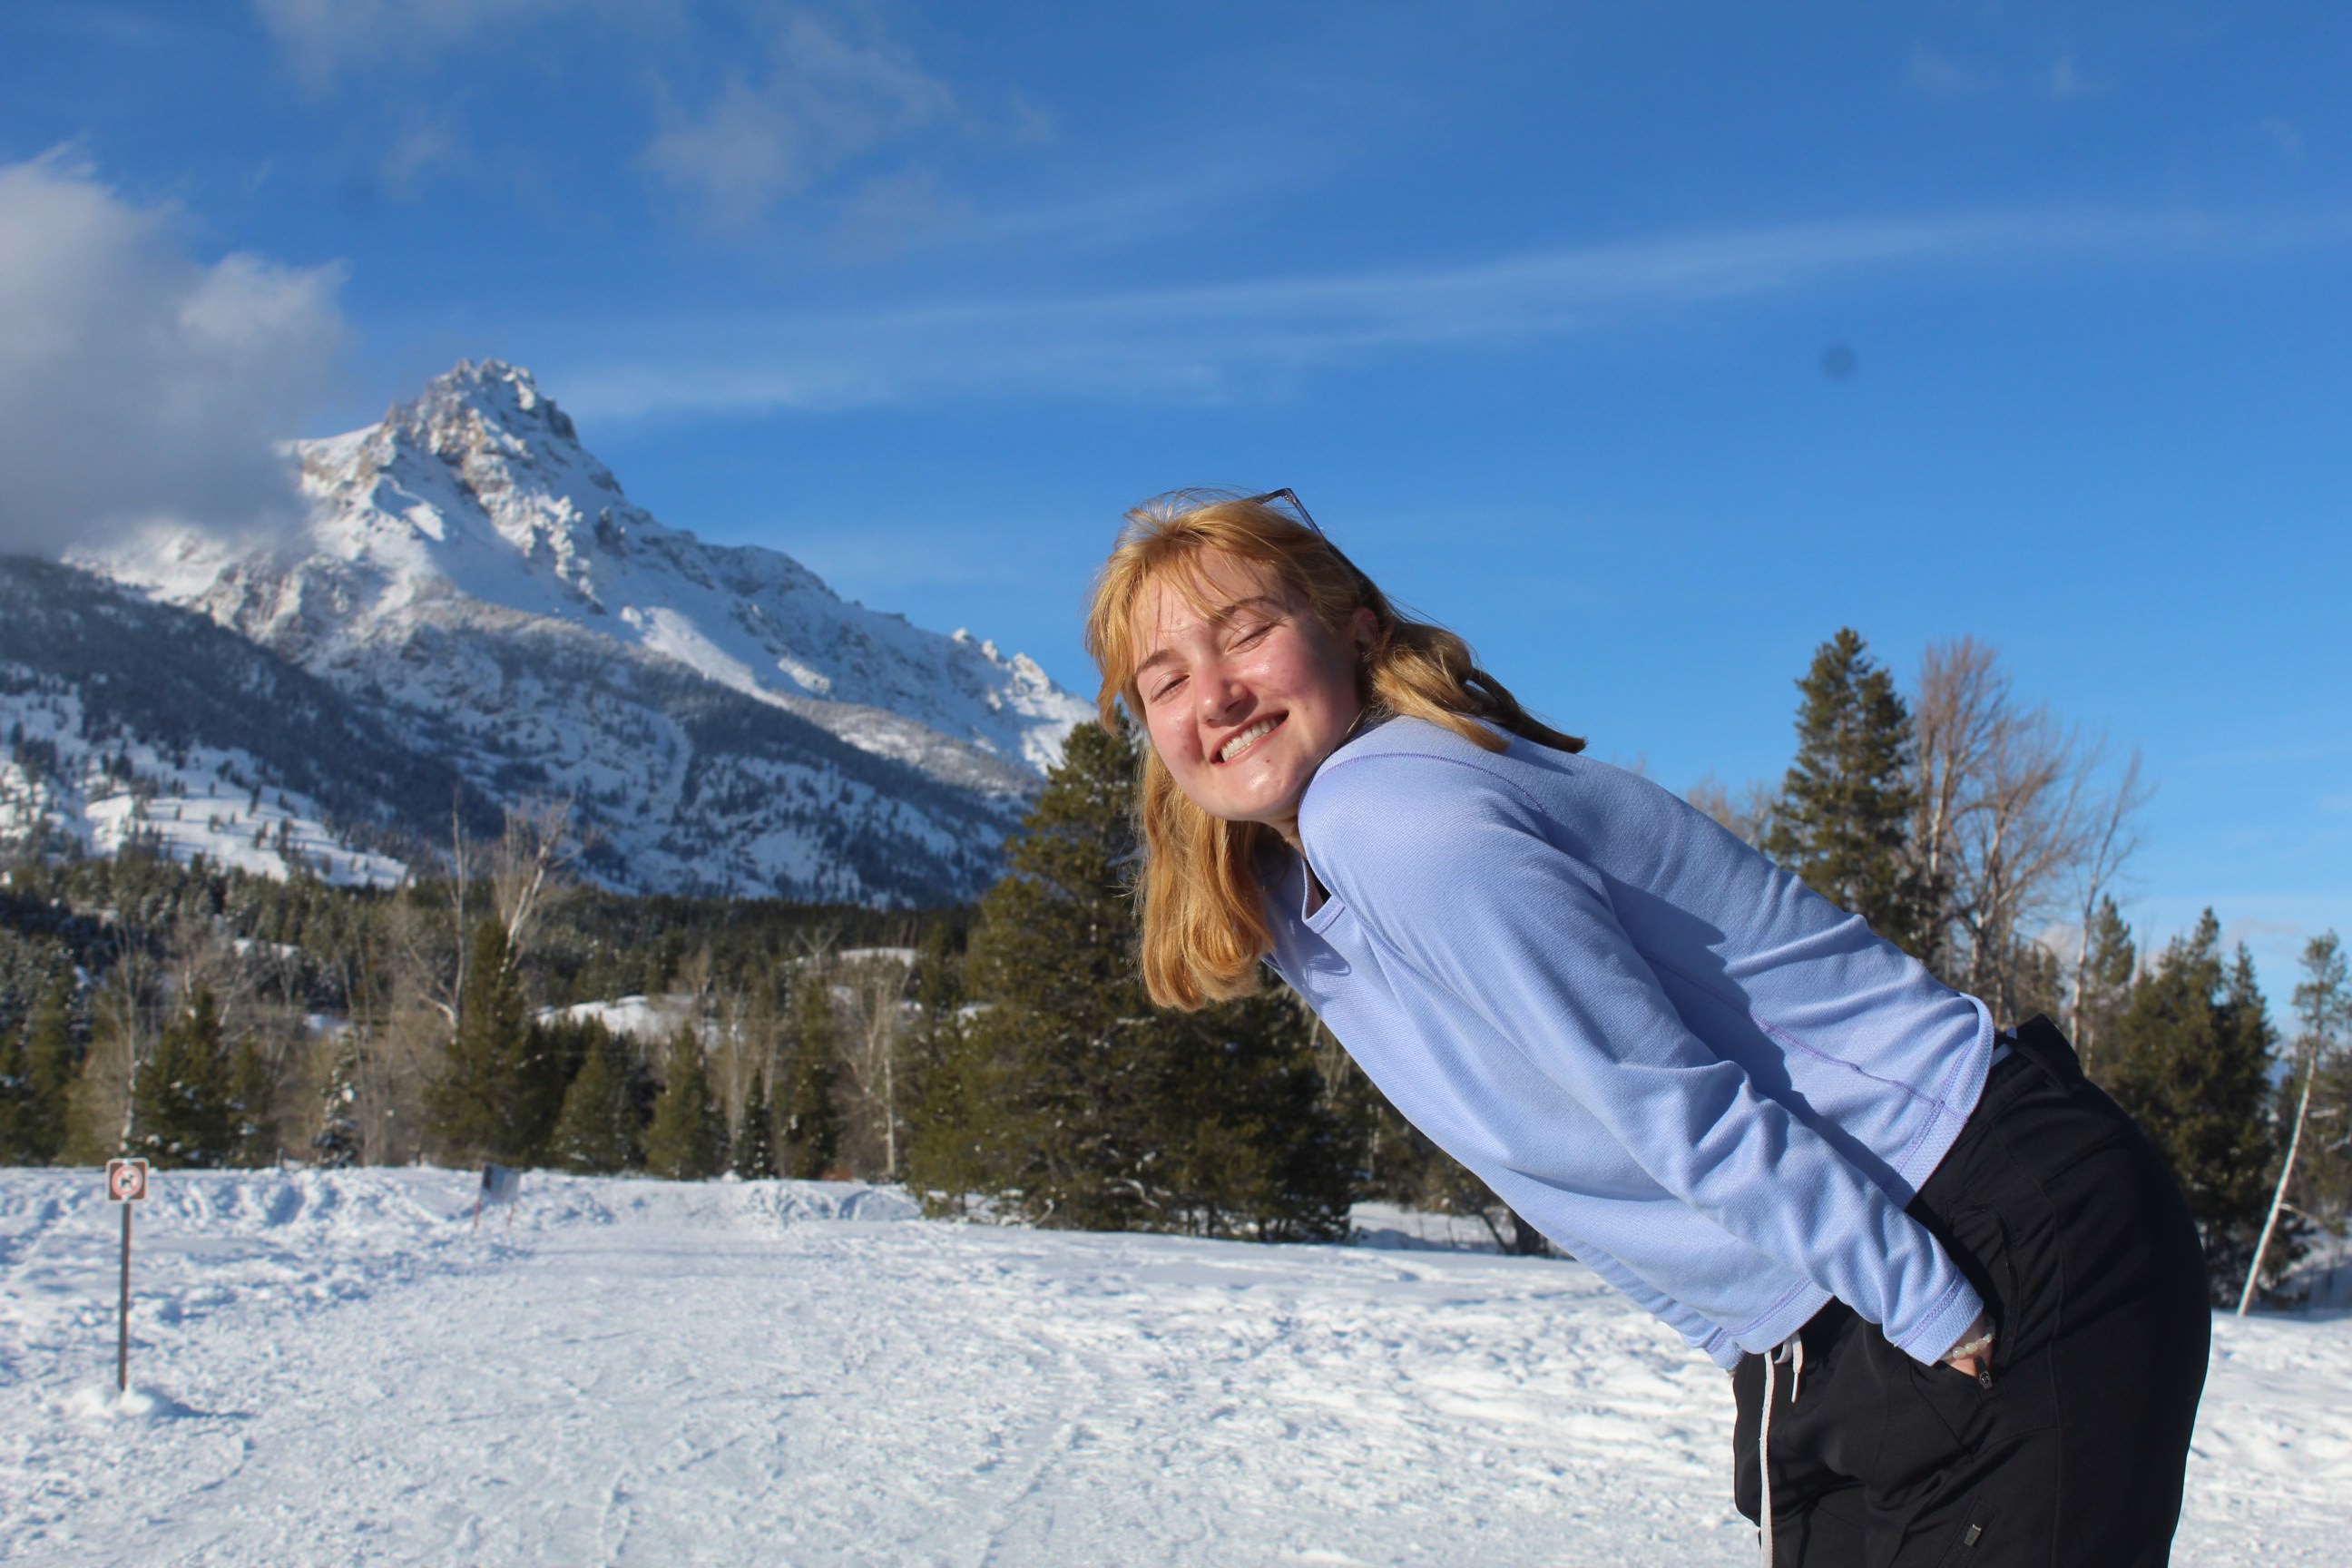 Leila pses with Tetons